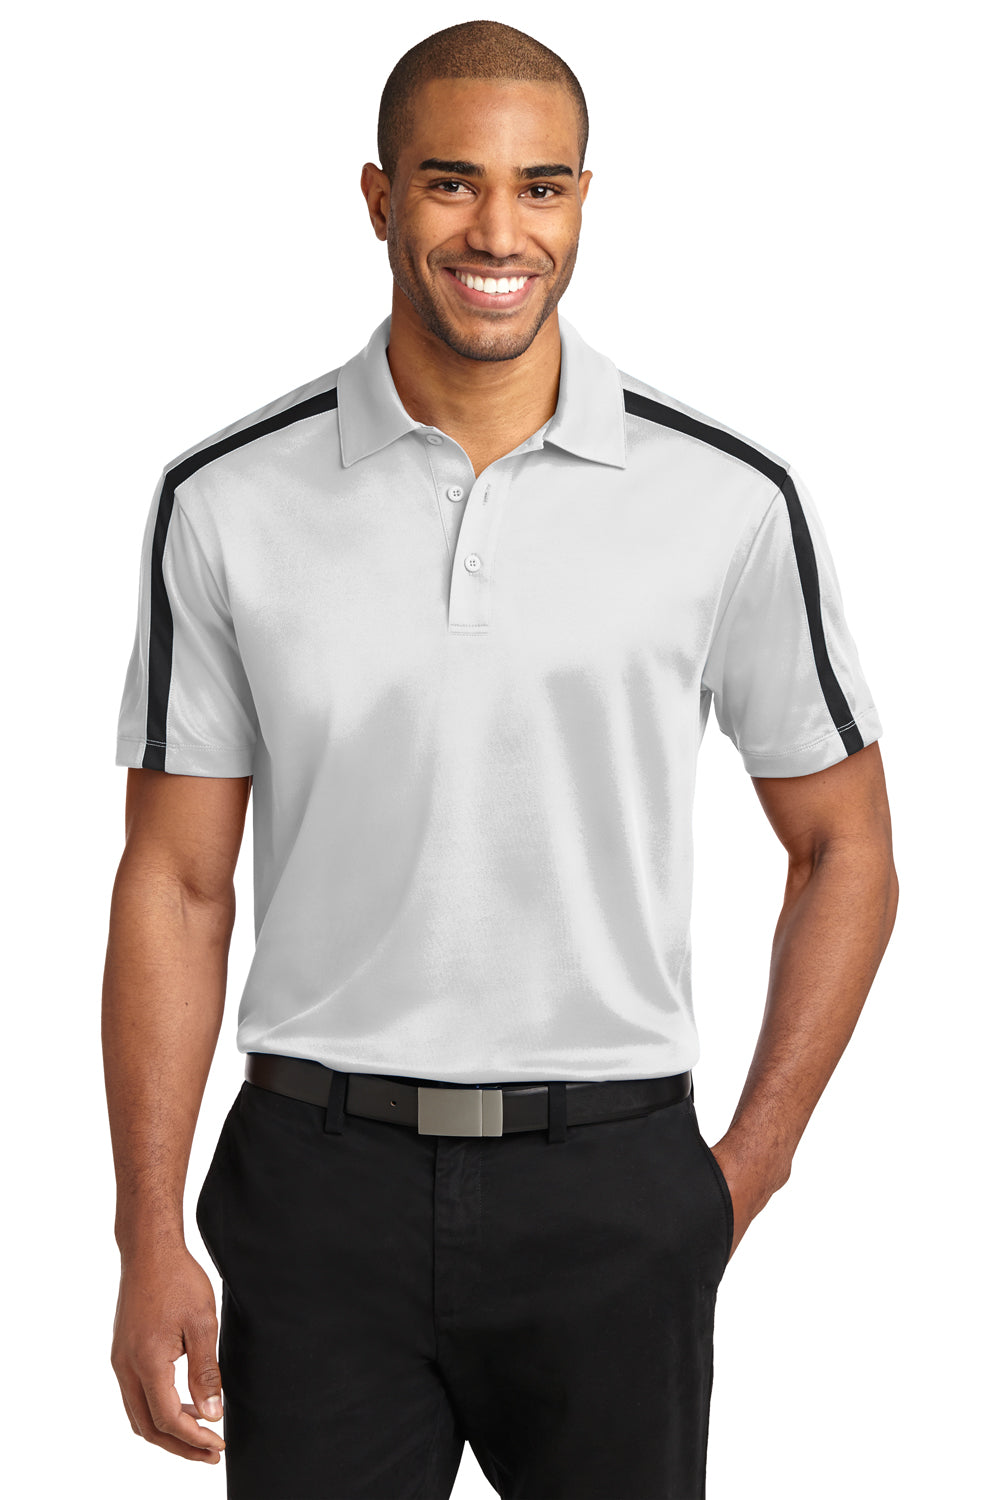 Port Authority K547 Mens Silk Touch Performance Moisture Wicking Short Sleeve Polo Shirt White/Black Front